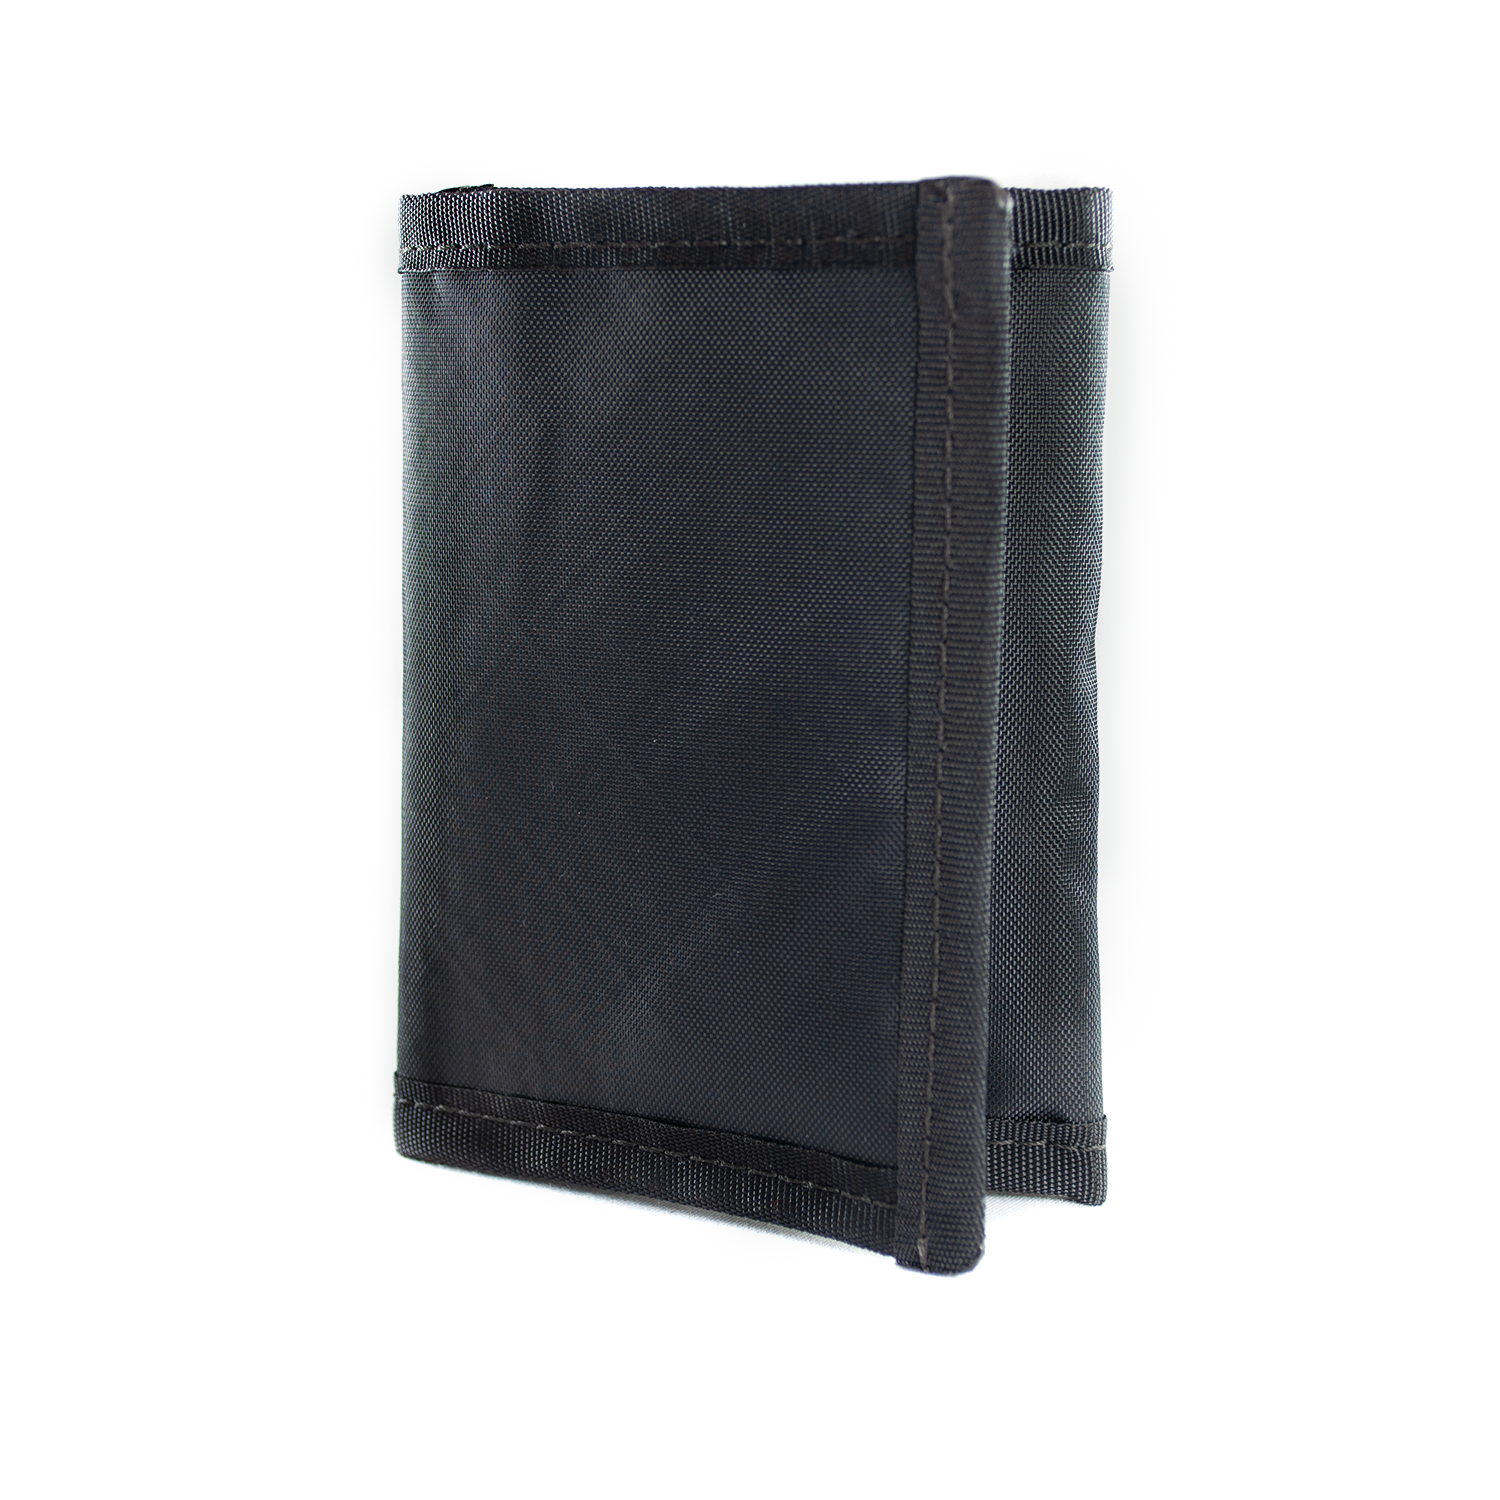 Flowfold Traveler Trifold Wallet Recycled Wallet of 100% Recycled Polyester EcoPak Jet Black